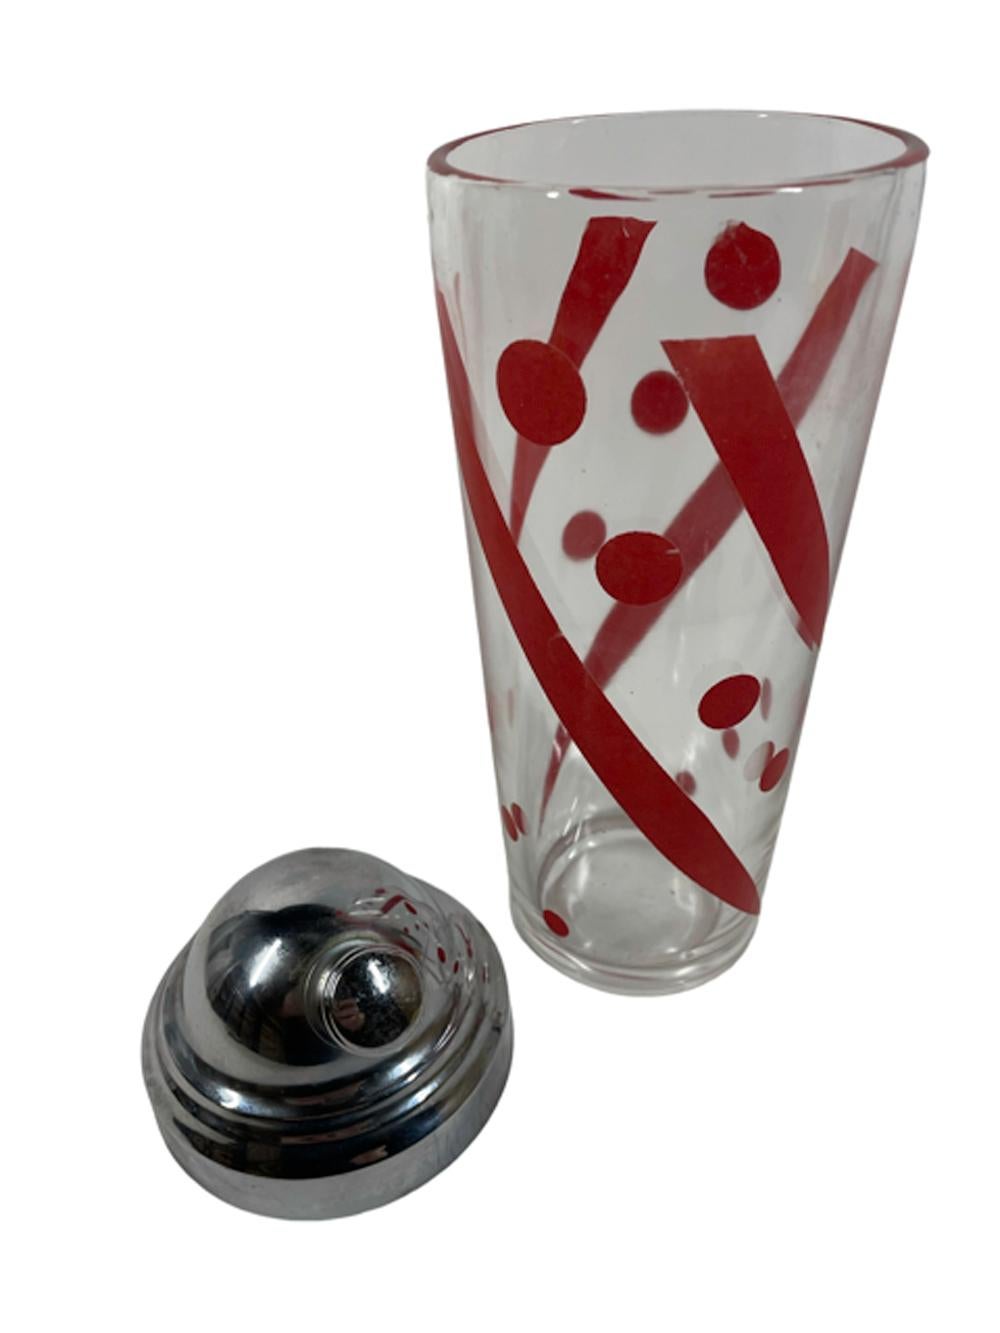 American Art Deco Cocktail Shaker w/Red Geometric Design on Clear Glass & Chrome Lid For Sale